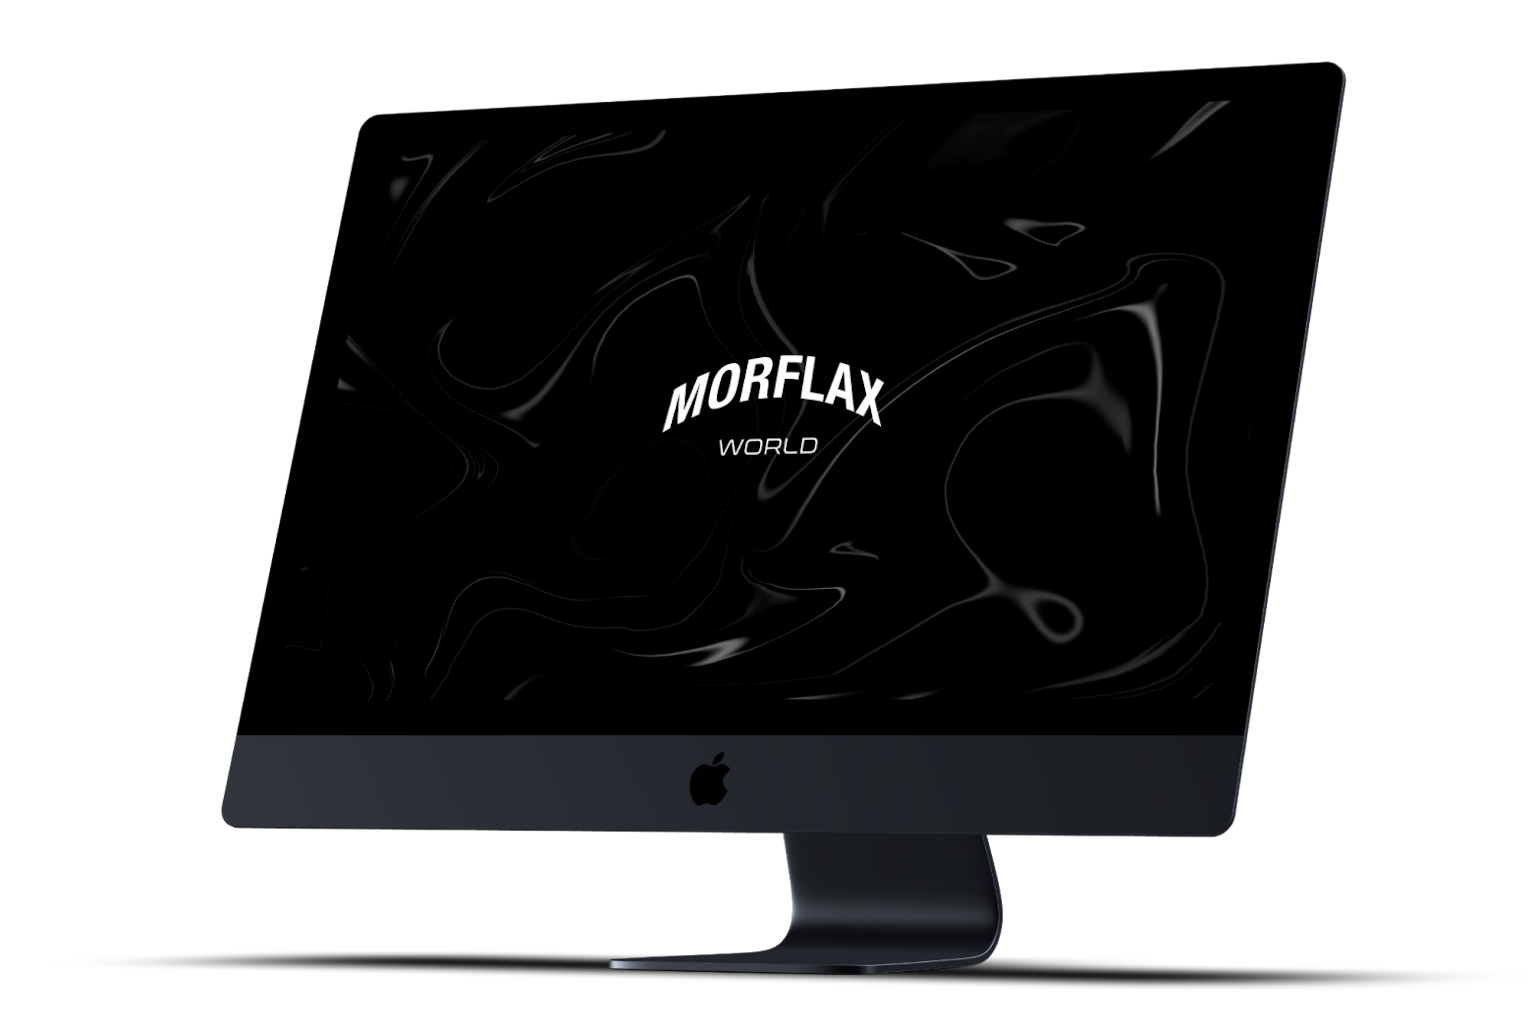 Customize and generate 3D device mockups, in the easy way. iPhone 12, 13, Macbook Pro, ProDisplay, iPad, iMac and many more.